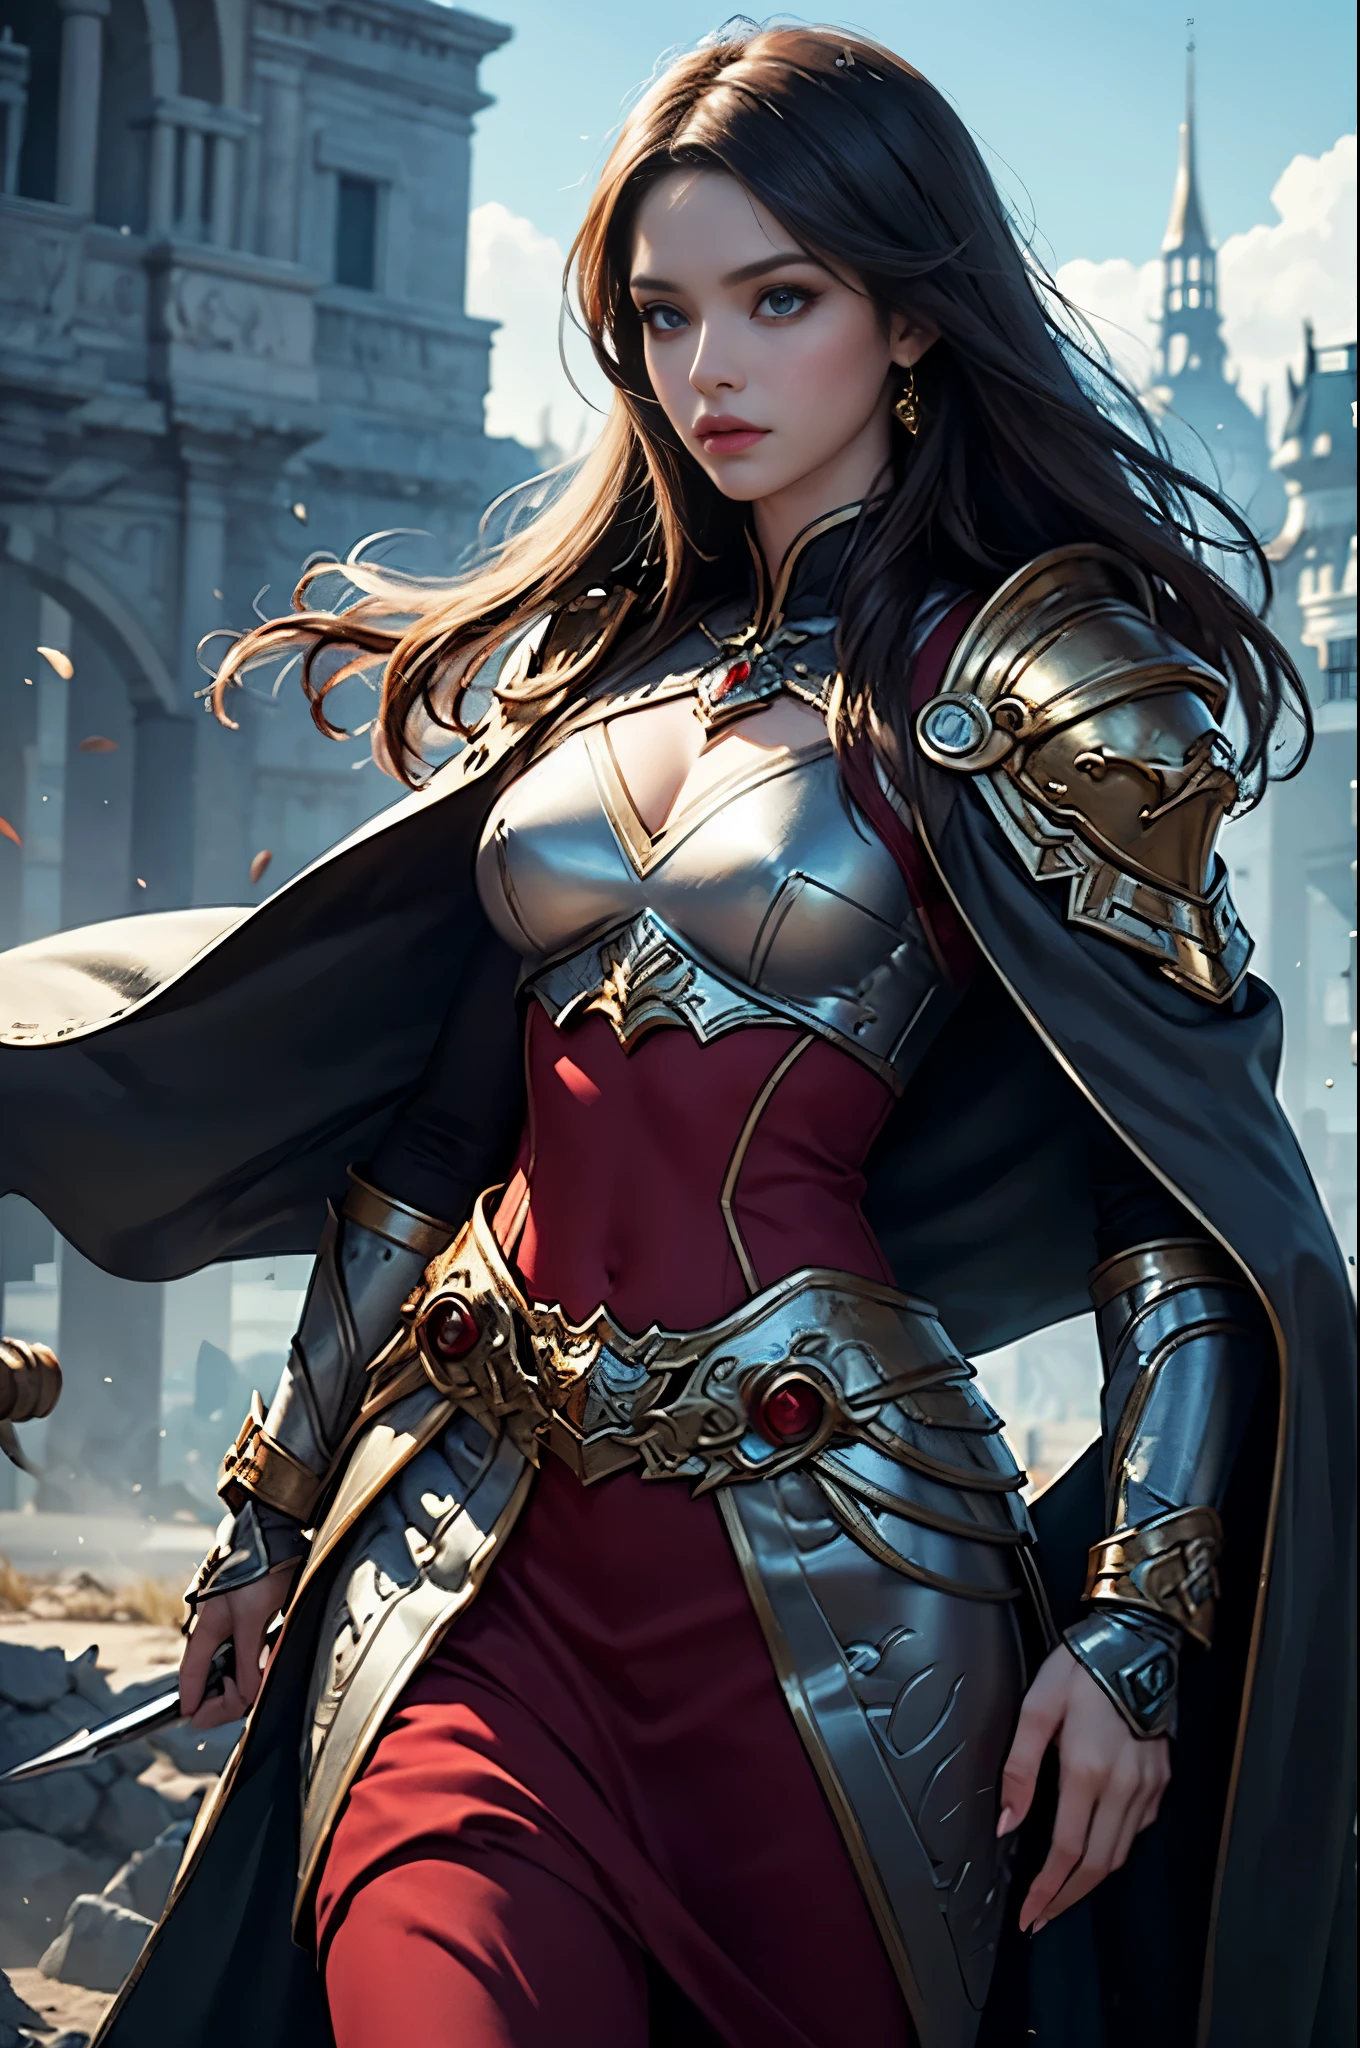 an arab woman wearing black and red costume、, a character portrait by Yang J, cg society contest winner, Fantasy Art, epic exquisite character art, Stunning character art, redhead queen in heavy red armor, 2. 5 d cgi anime fantasy artwork, epic fantasy art style, ig model | ArtGerm, epic fantasy digital art style, Battlefield Commander,A woman in her 30s with unparalleled beauty, Invincible female general, Brave, Awe-inspiring Hall々, extremely detailed and beautiful eyes, blue eyes without pupils, perfect supermodel body, slender body, Cloak wrapped in the wind, Battle Master, Swordmaster,  Veteran Warrior, incarnation of athena, Best Quality, Perfect Angle, perfect-composition, Best Shots, Official art, ciinematic light